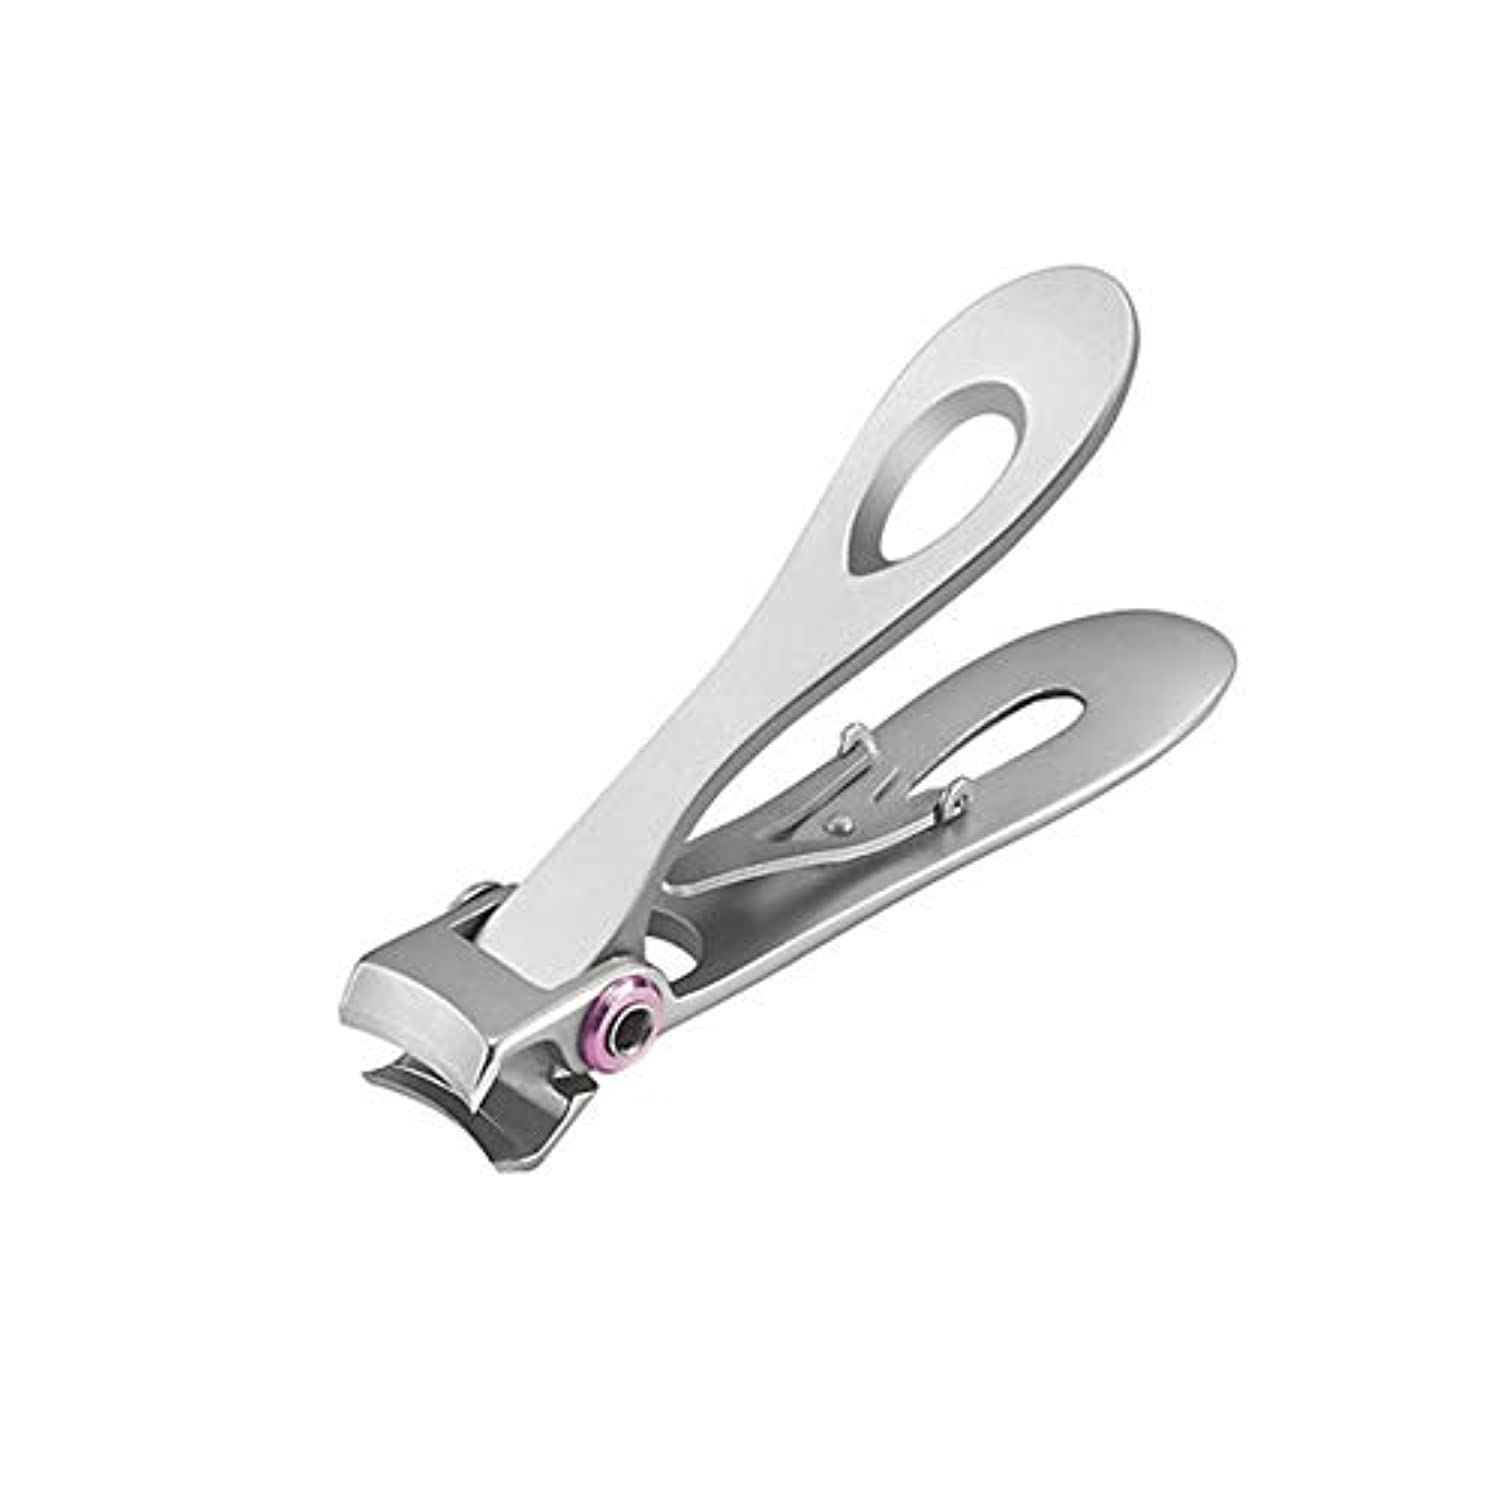 Ukissim Nail Clippers for Thick Nails, 15mm Wide Jaw Opening Extra Heavy Duty Finger Nail Cutter for Ingrown Toenail Clippers Trimmer for Men&Women&Seniors